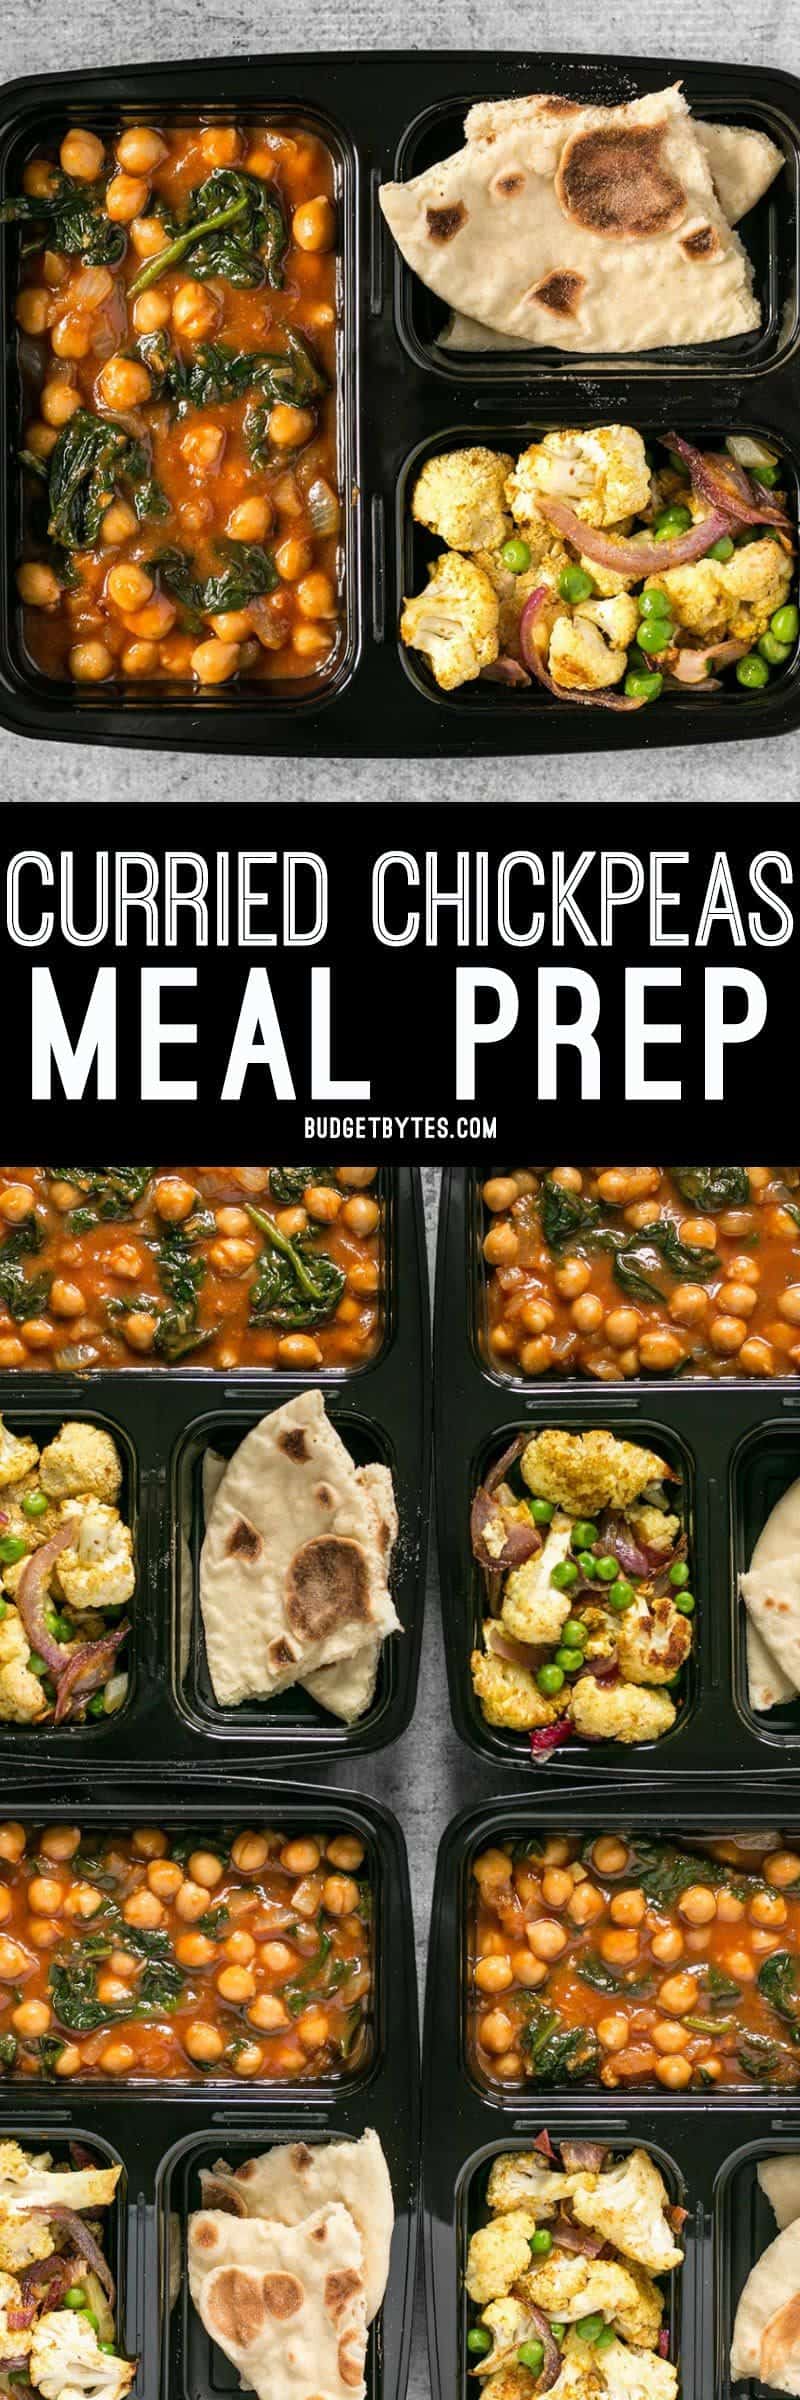 This week's Curried Chickpeas Meal Prep is a filling and flavorful vegetarian meal with a vegan option. BudgetBytes.com